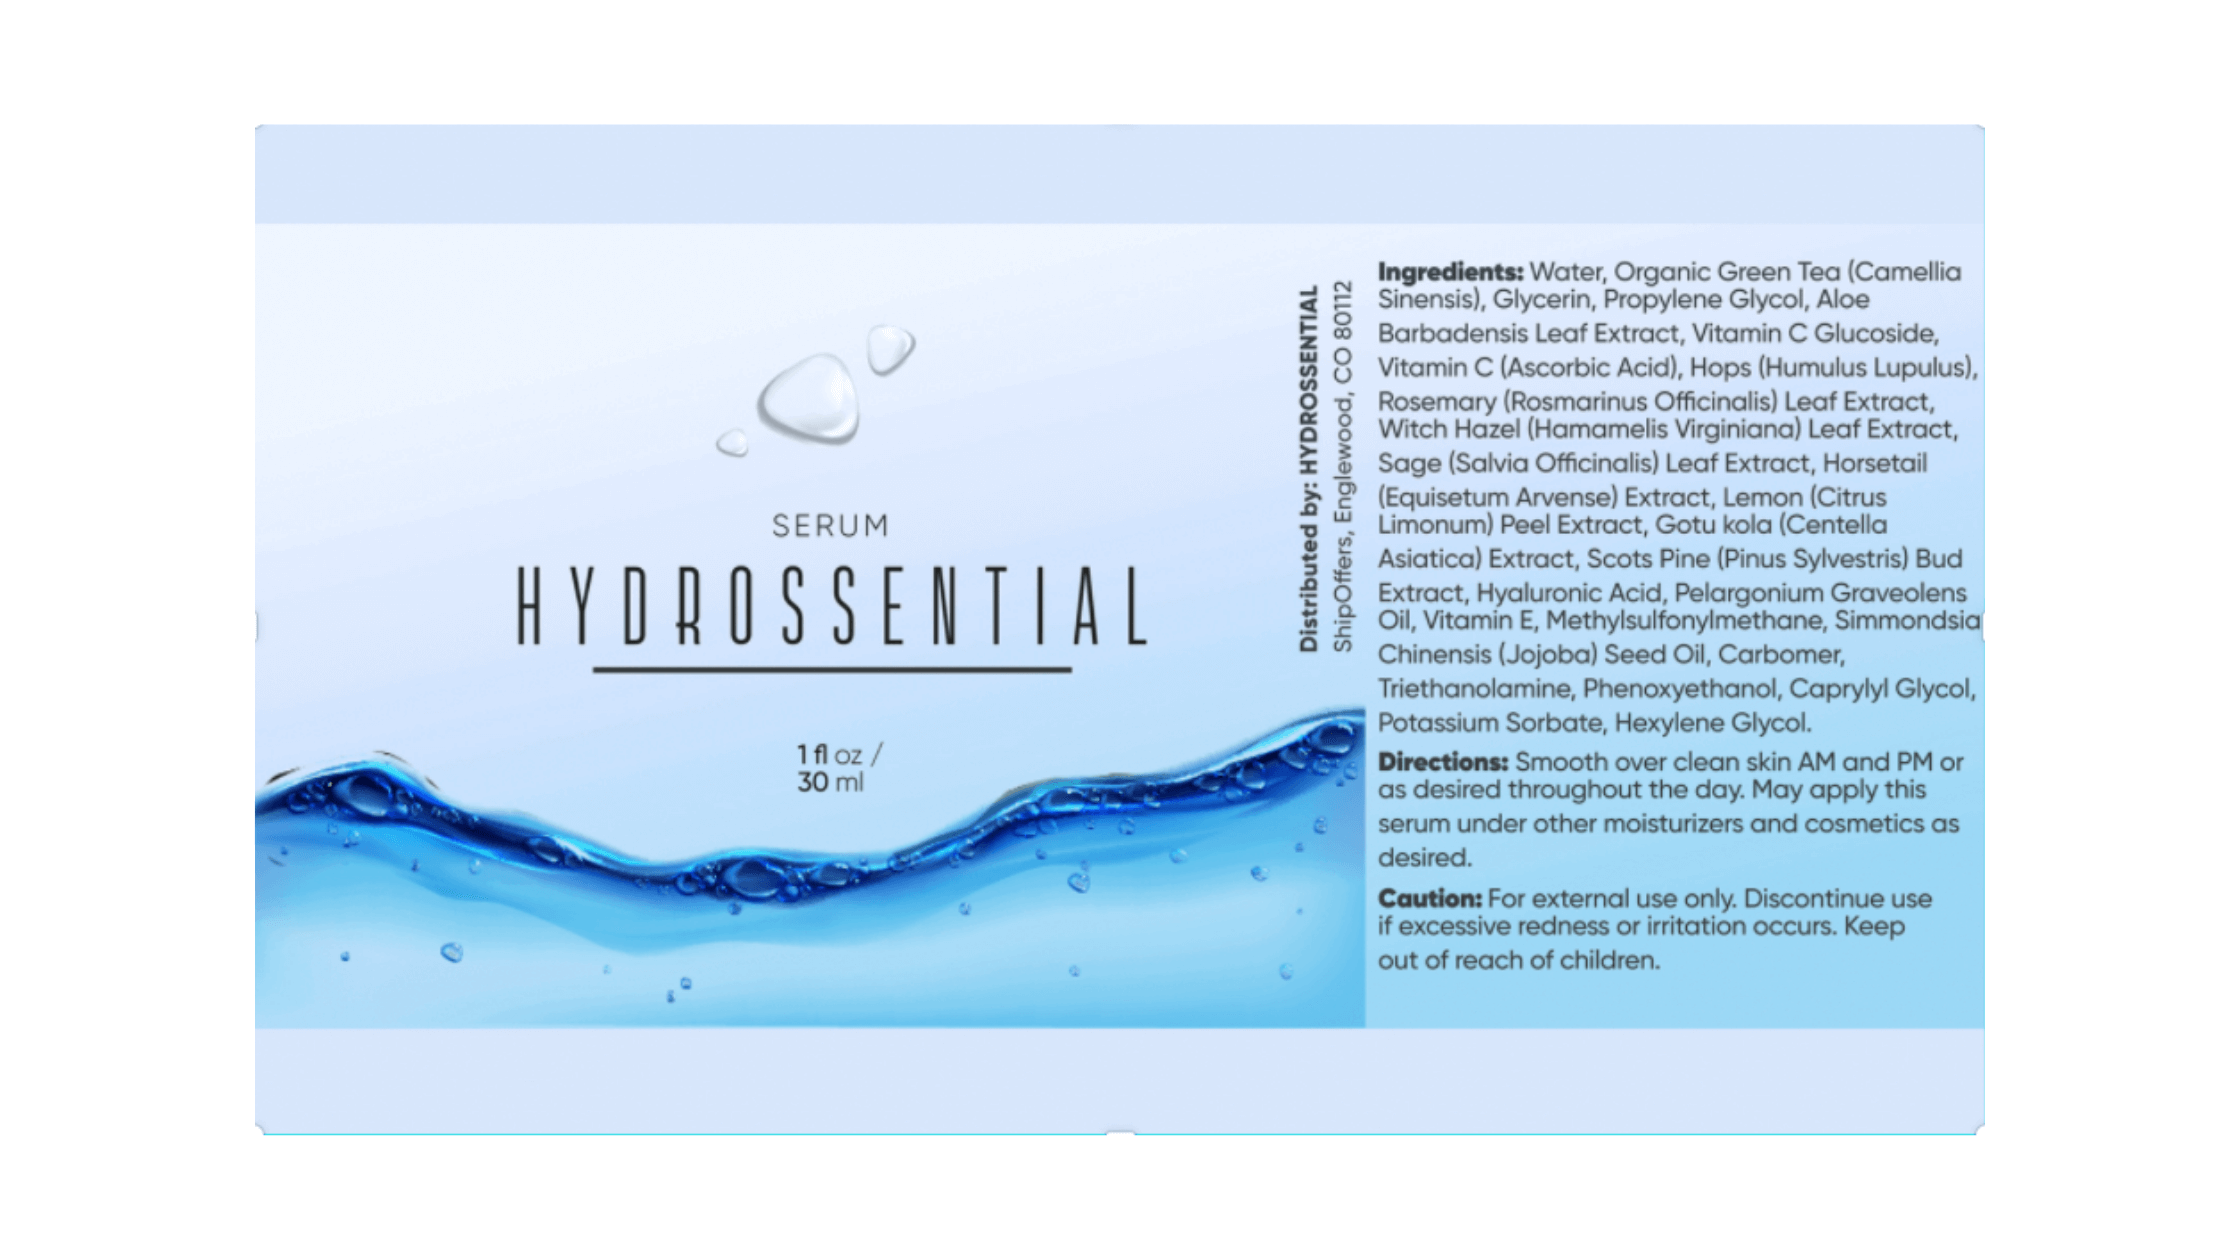 Hydrossential supplement facts